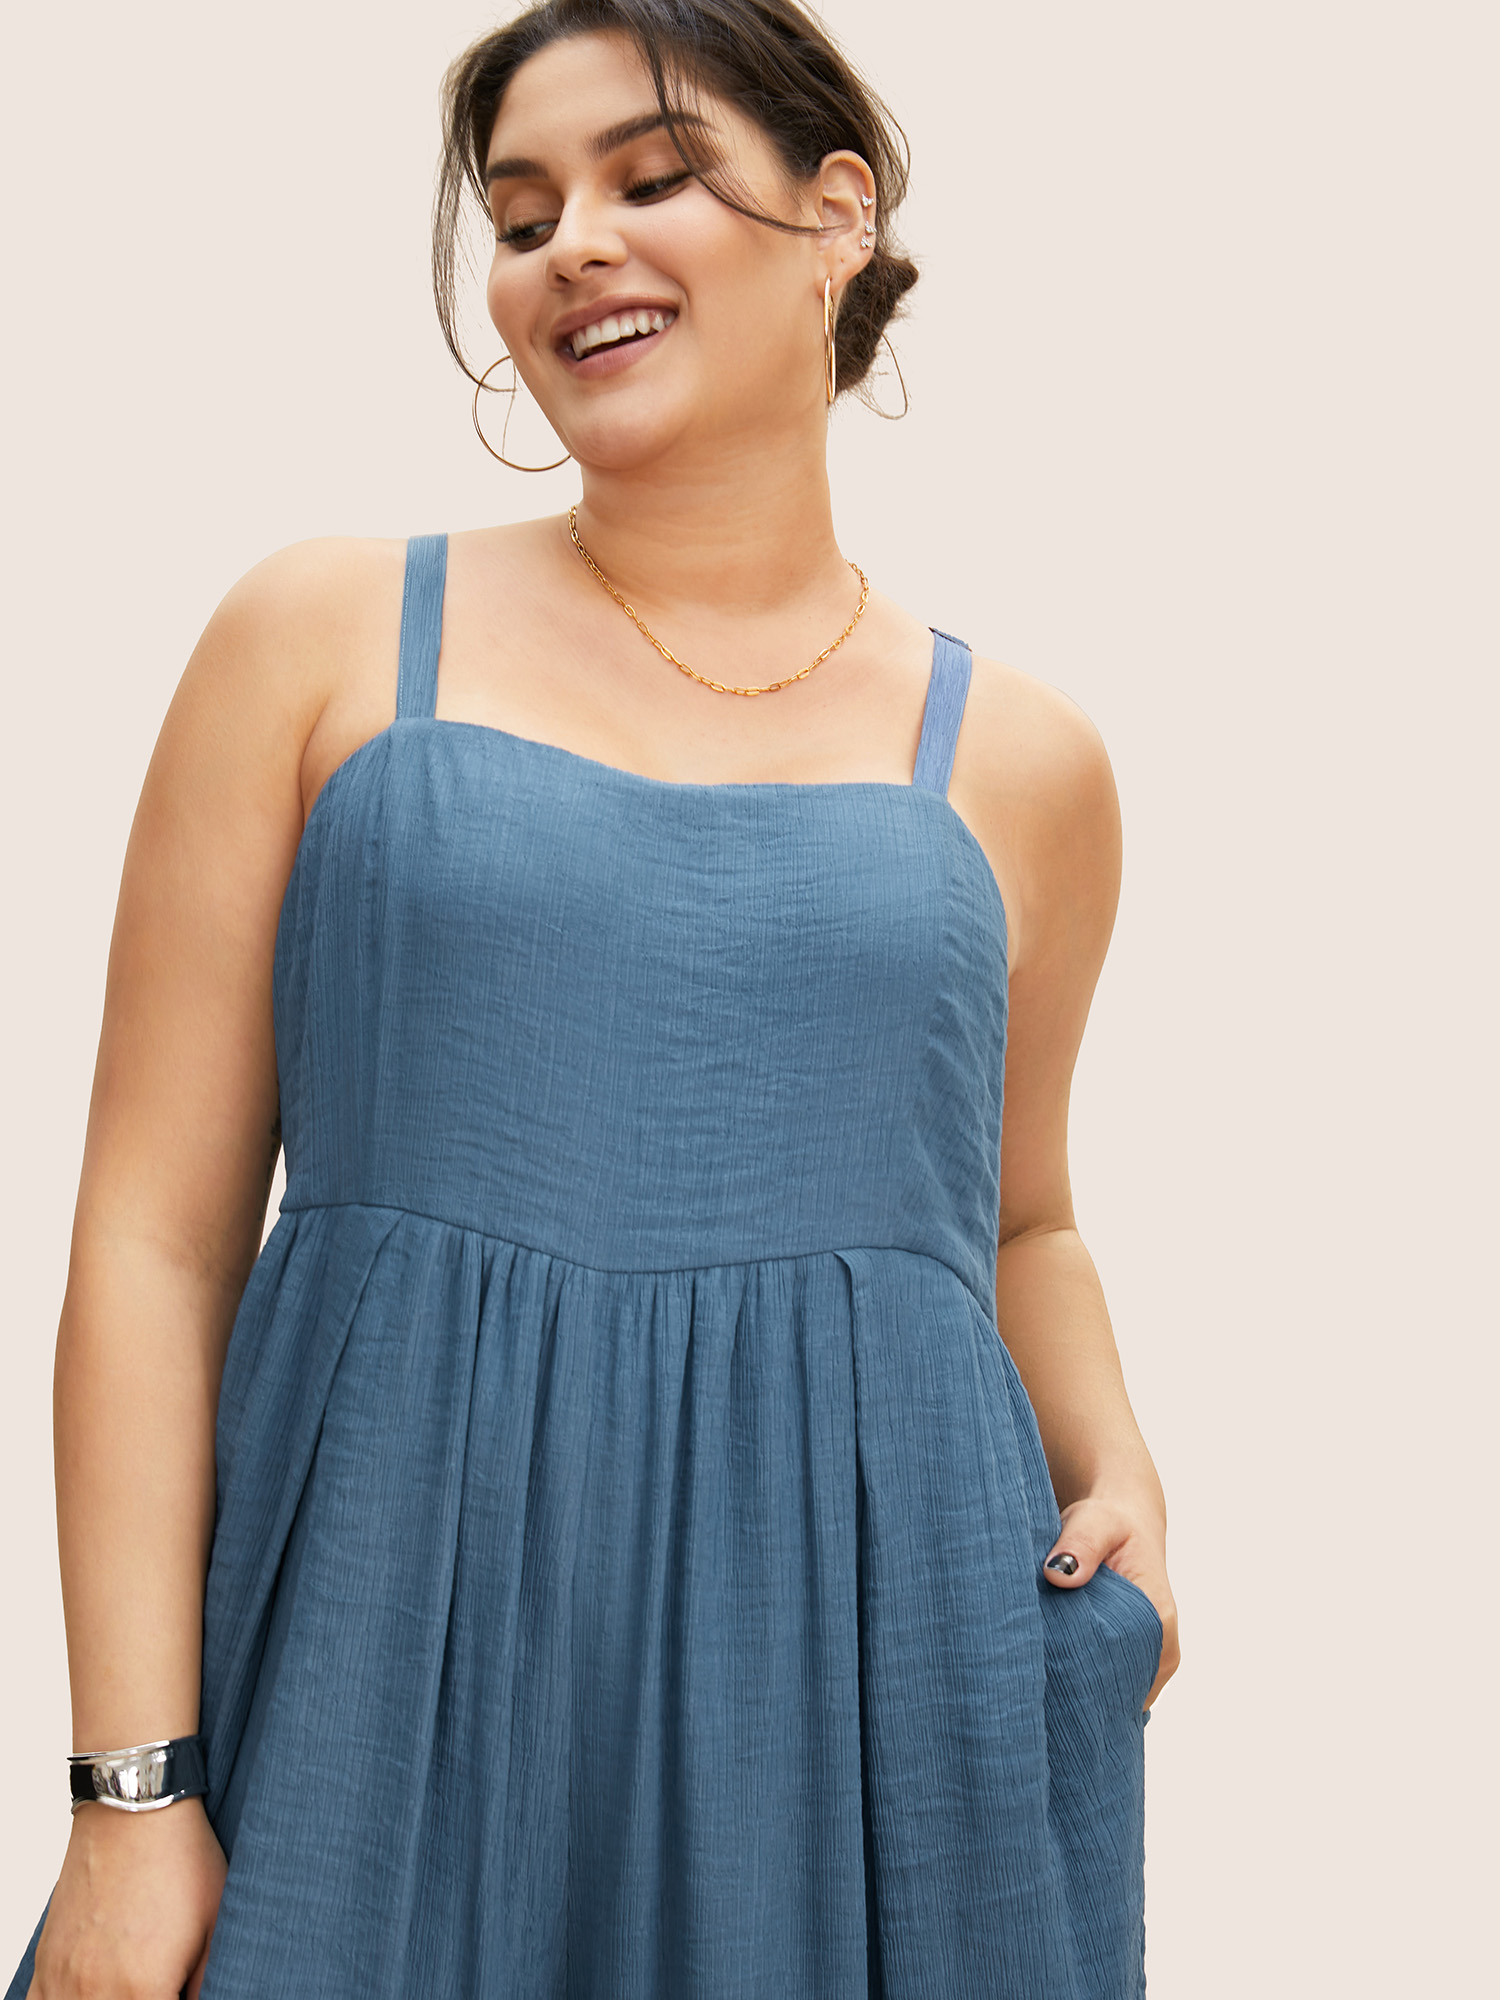 

Plus Size Mediumblue Square Neck Plain Textured Cropped Jumpsuit Women Casual Sleeveless Square Neck Everyday Loose Jumpsuits BloomChic